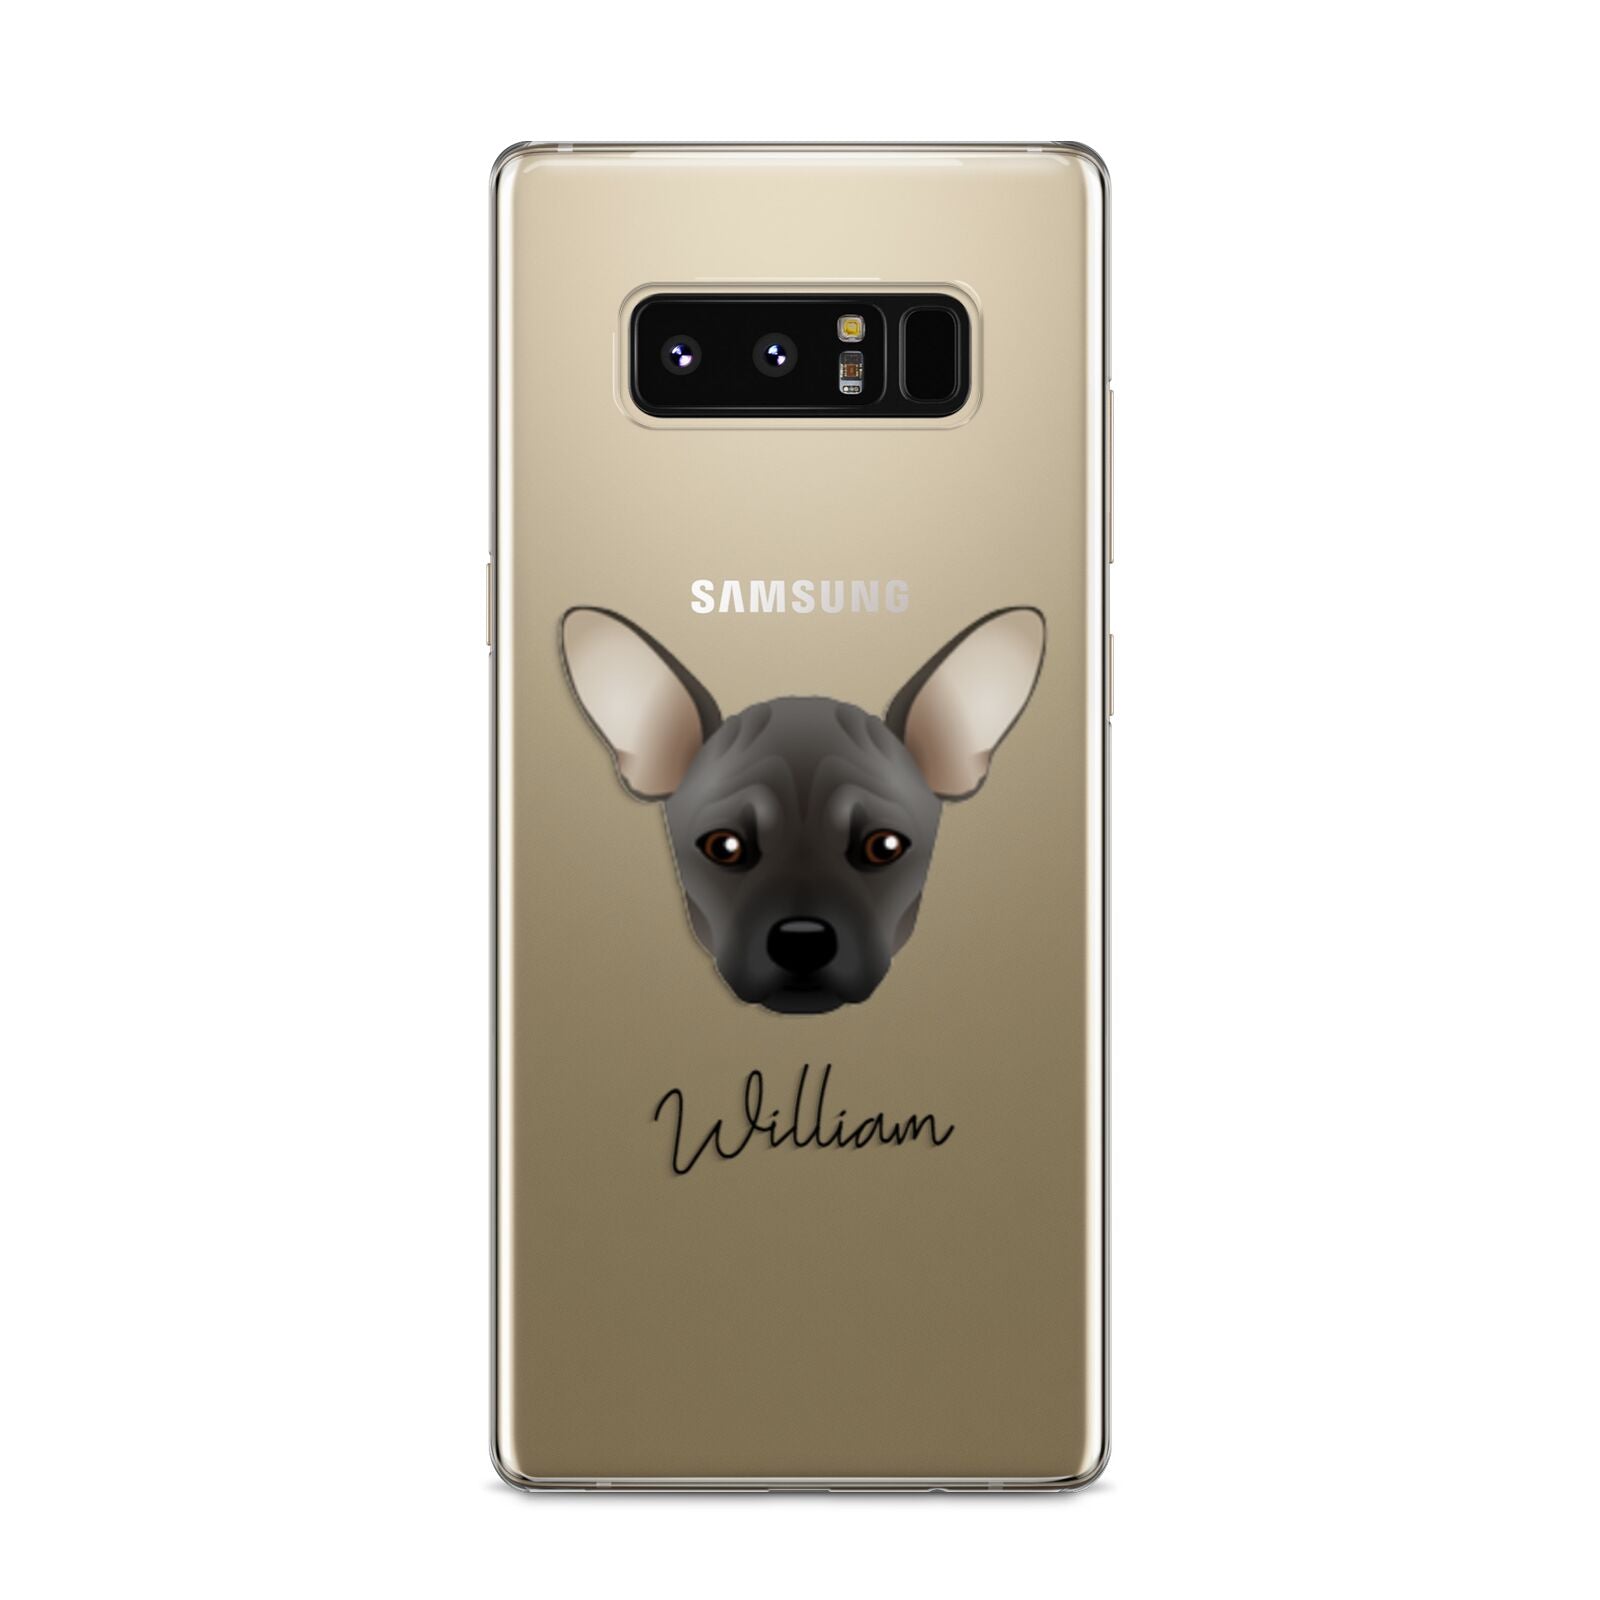 French Pin Personalised Samsung Galaxy S8 Case